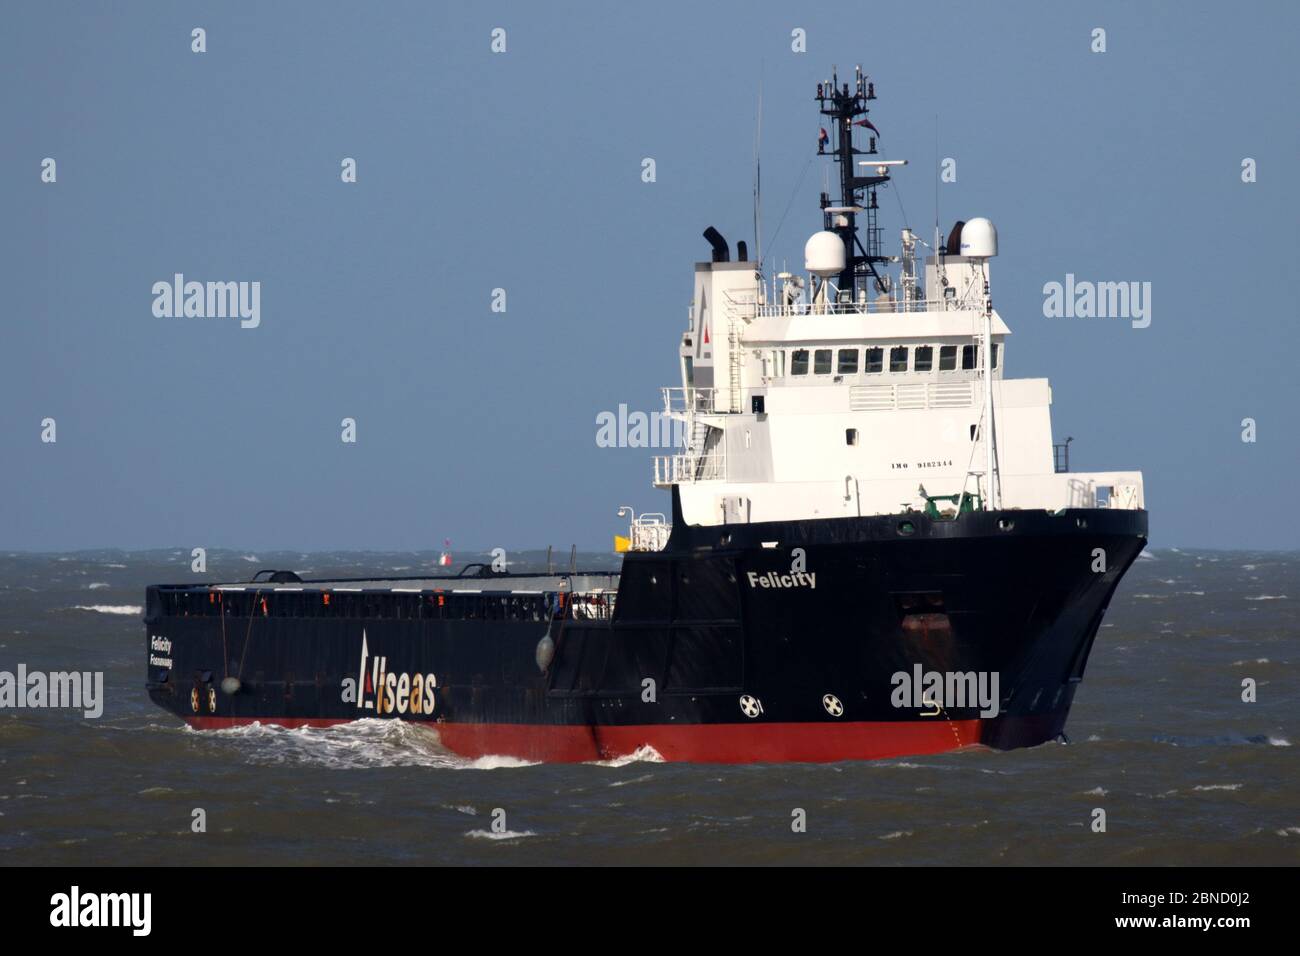 The offshore supply ship Felicity will reach the port of Rotterdam on March 12, 2020. Stock Photo